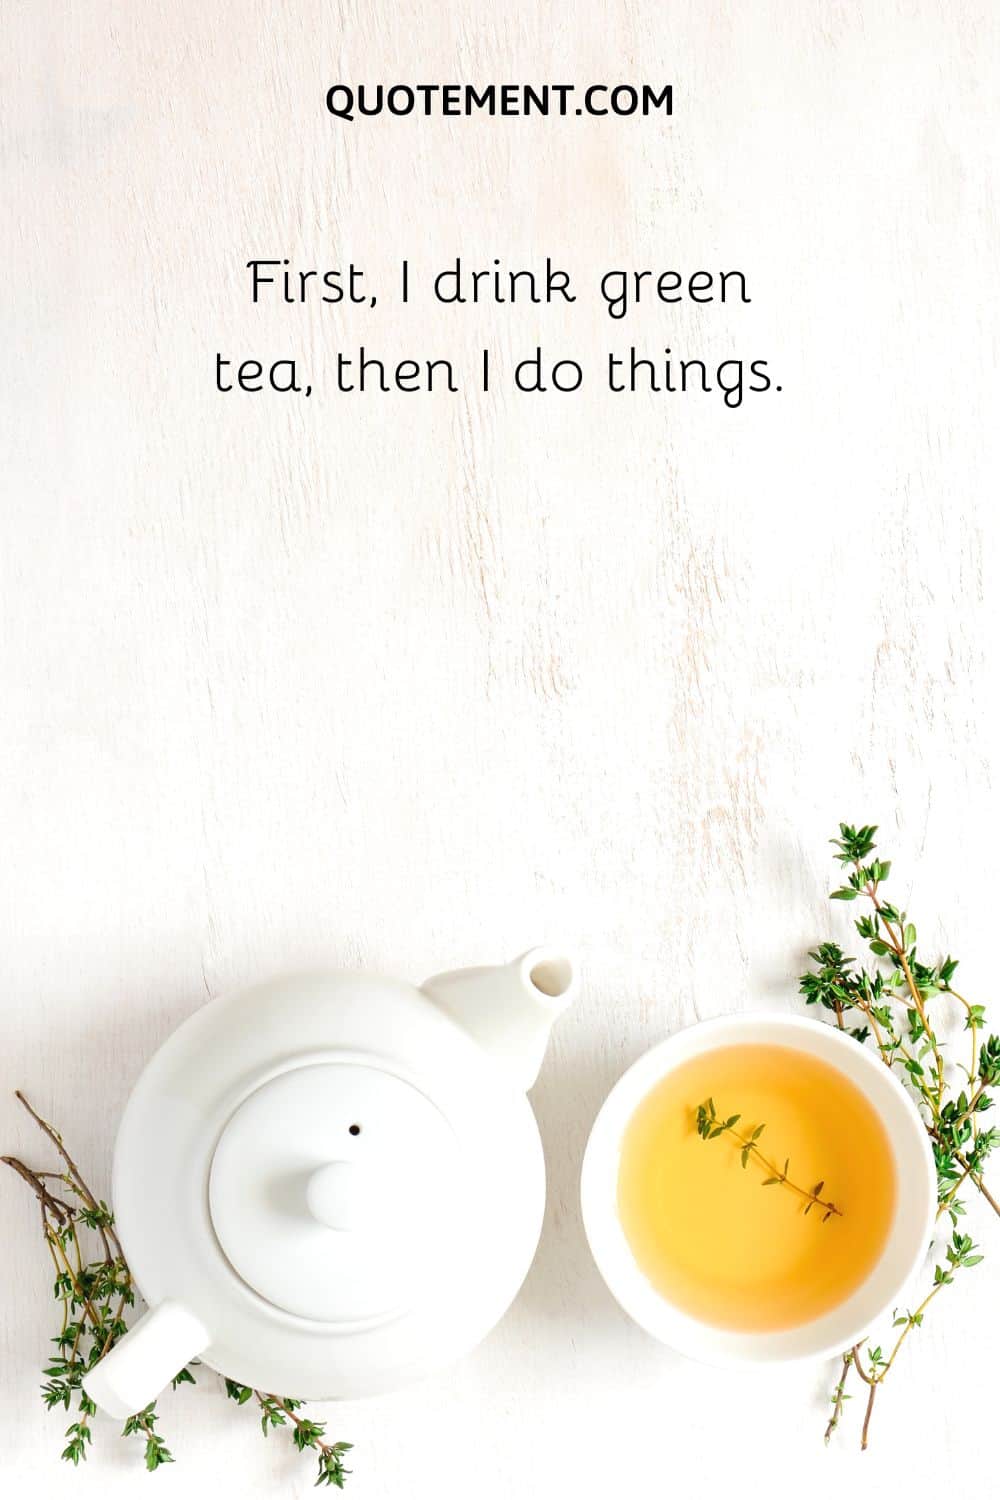 First, I drink green tea, then I do things.